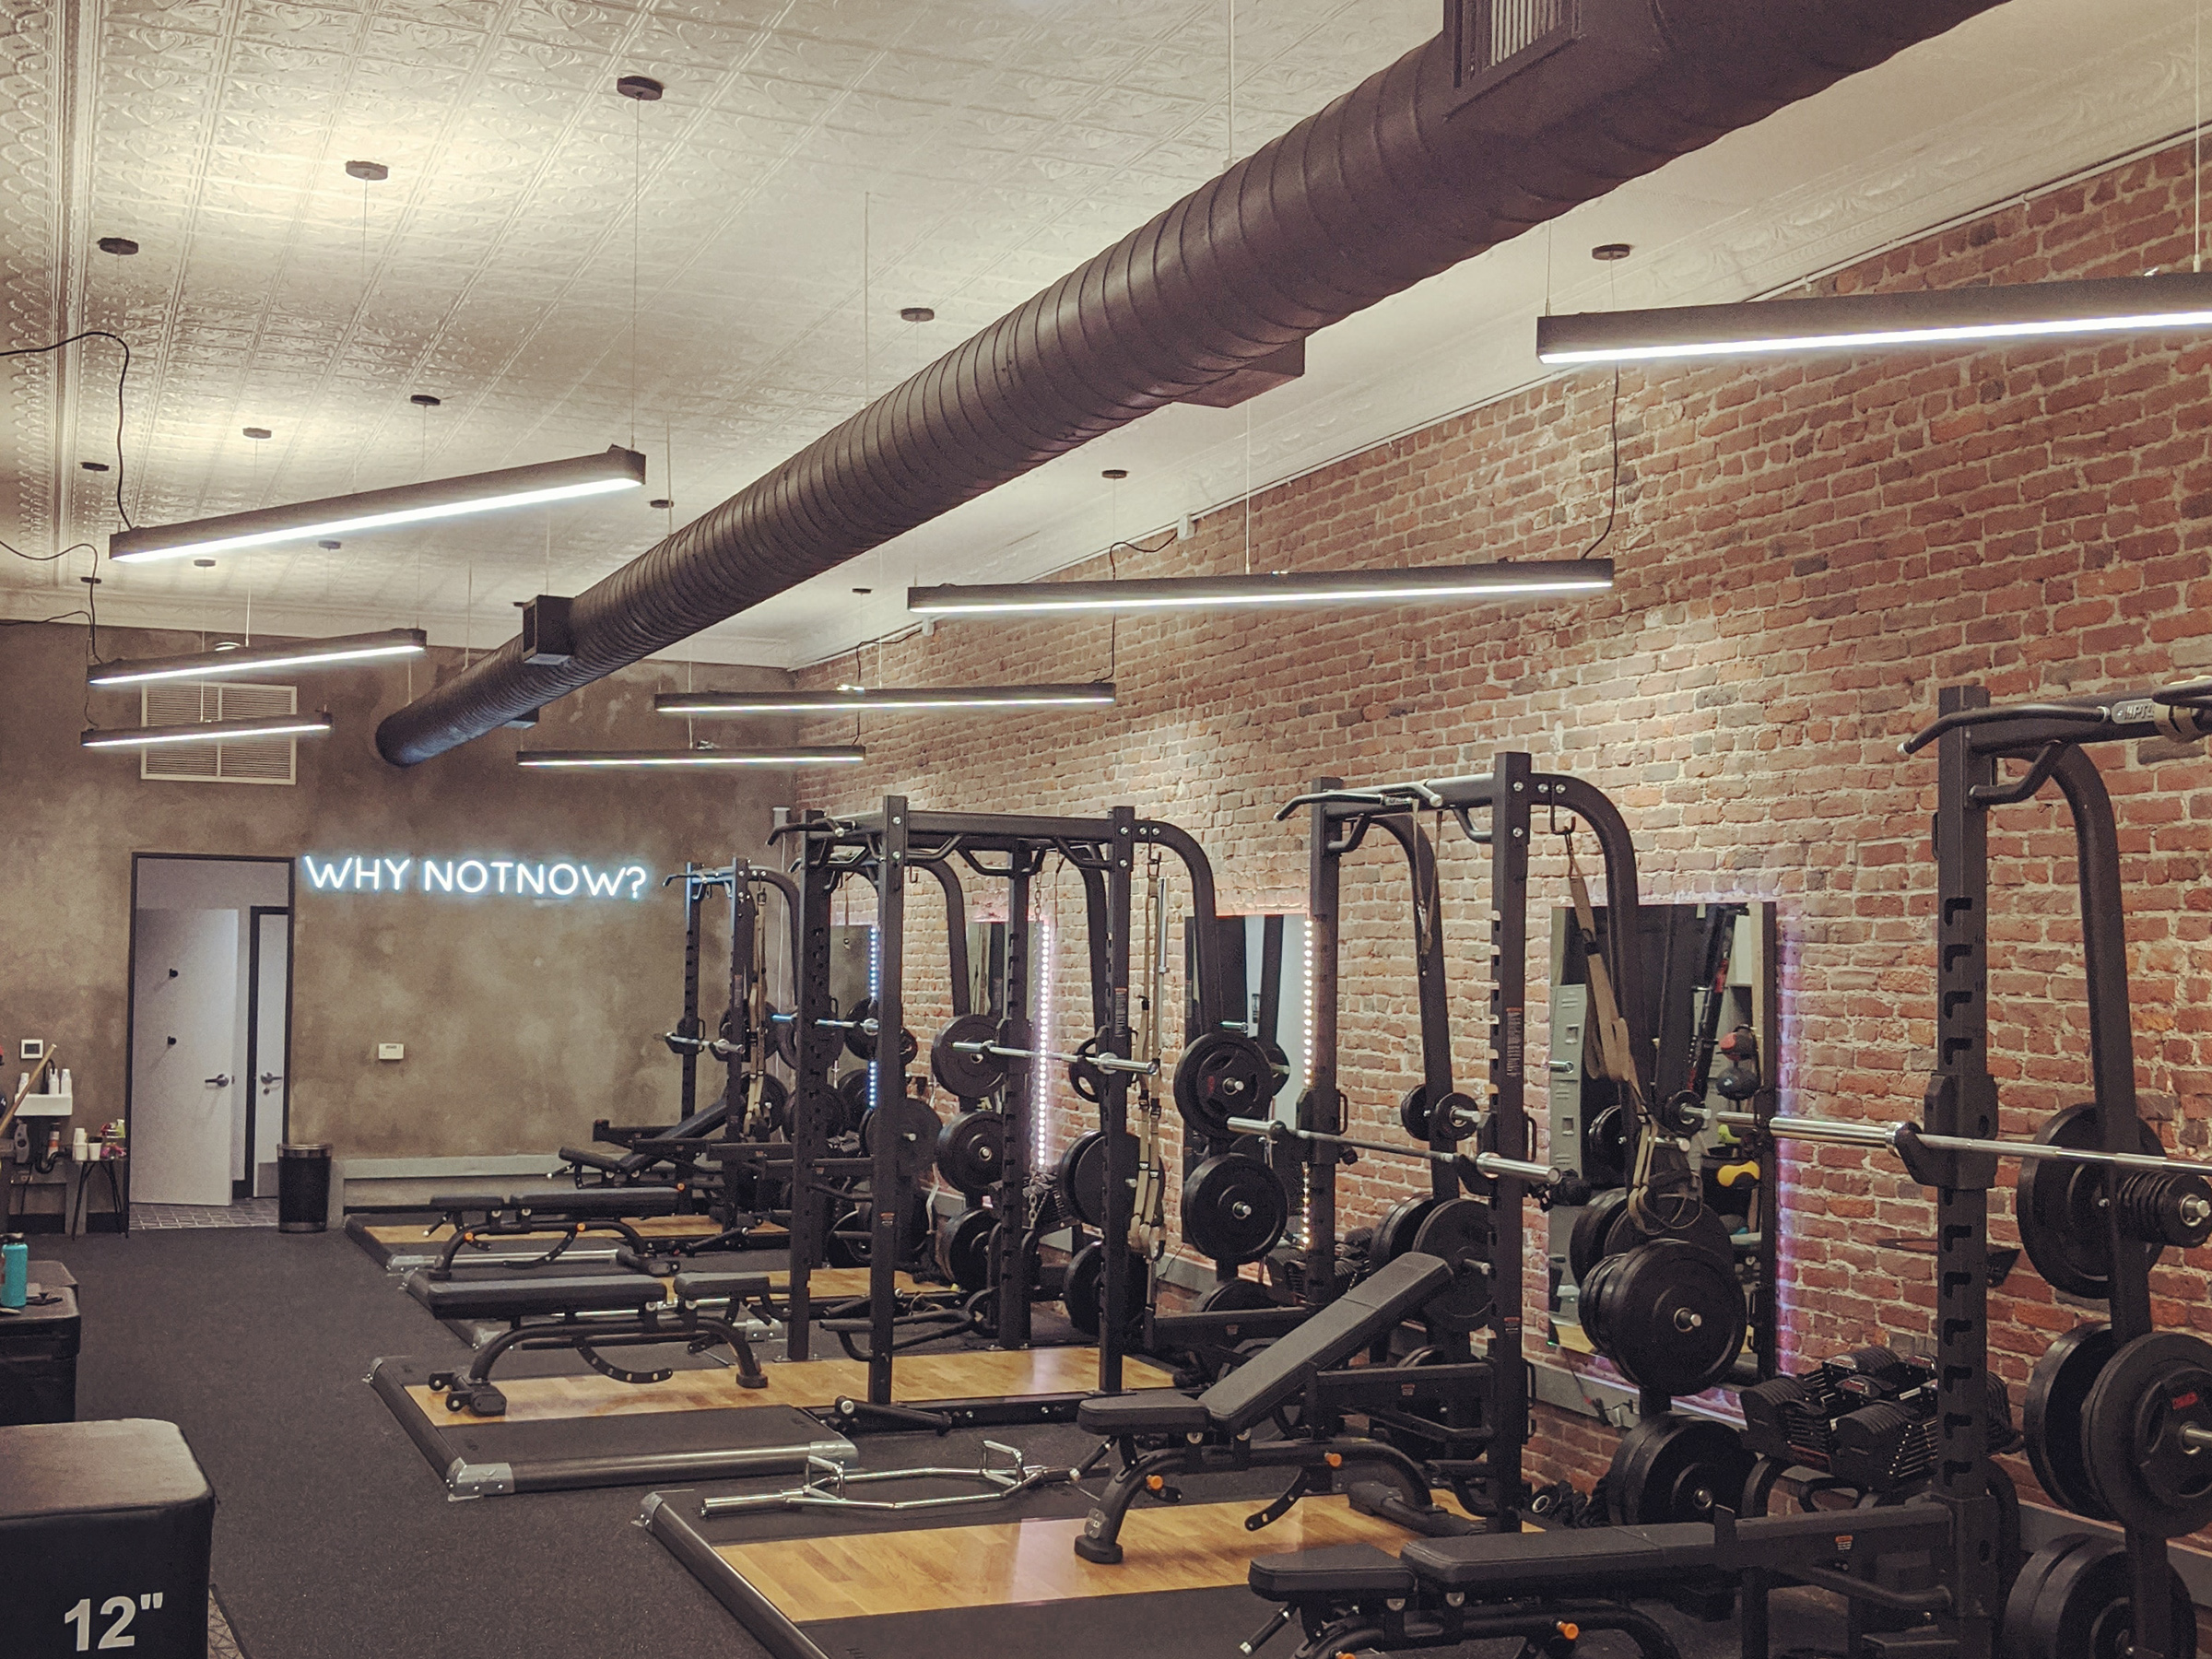 view looking into the fitness room with angled lights and a black duct overhead